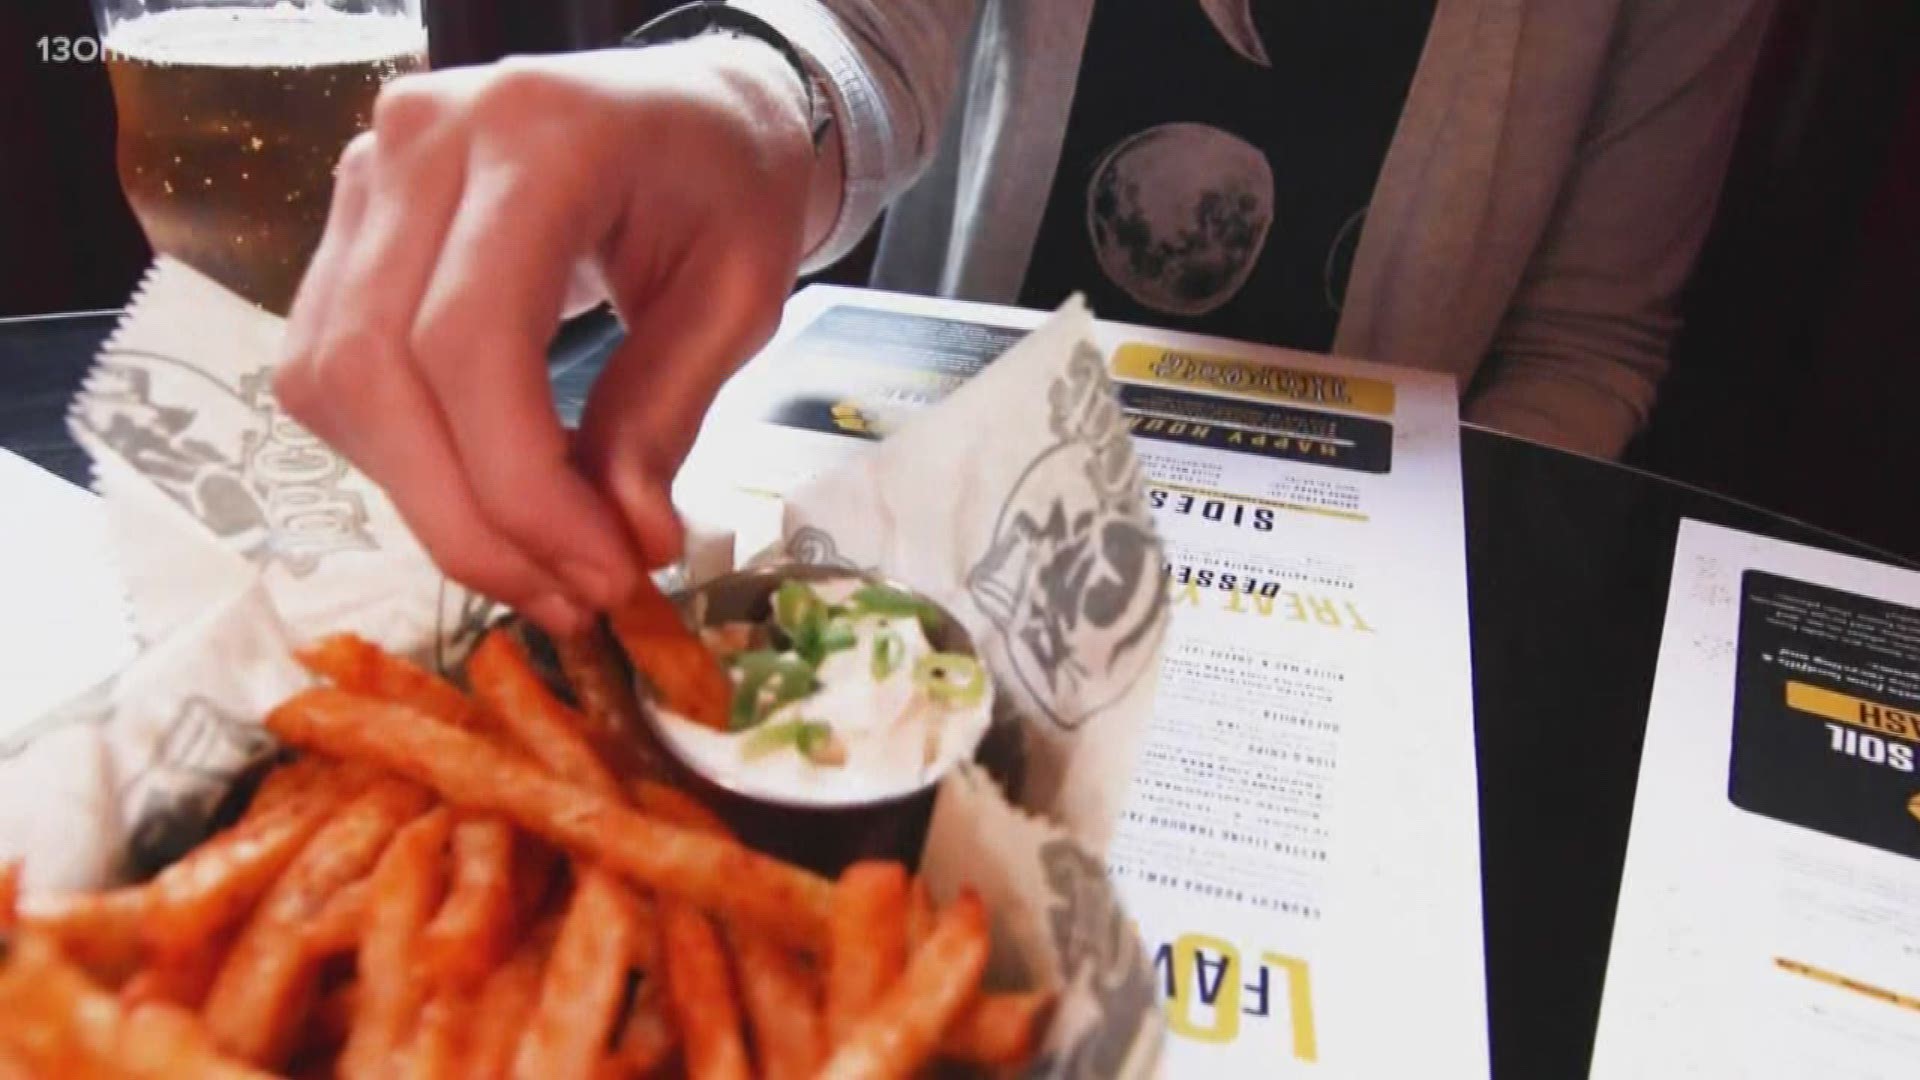 HopCat crowns Shakshuka Spiced Fries as the winner of the ‘Decide the Fries’ contest. French fry fans voted on three never-before-seen flavors back in September.